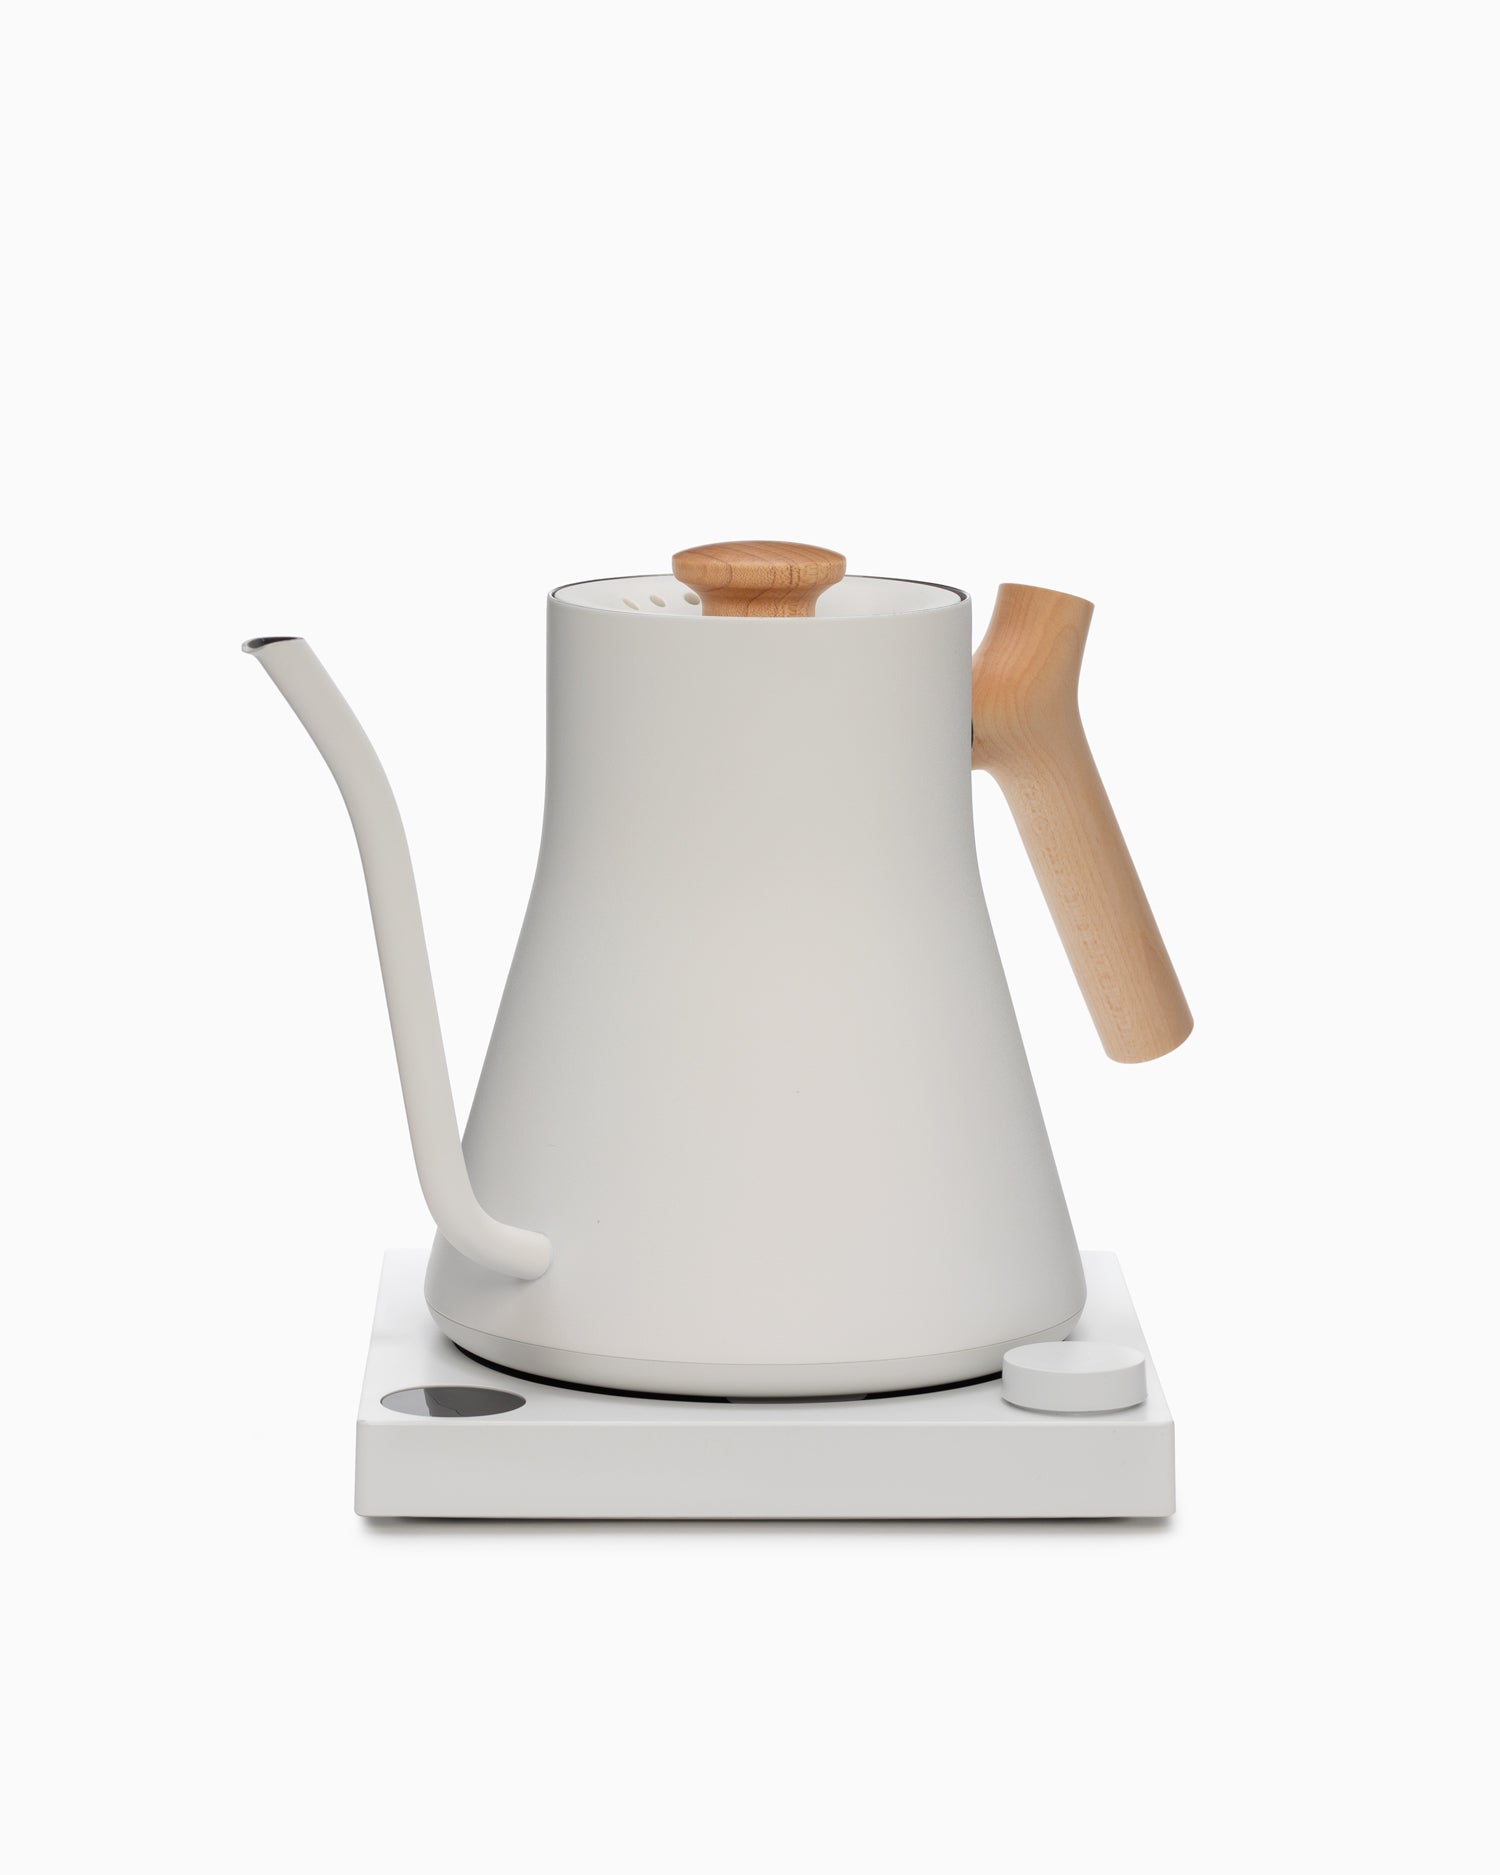 Stagg EKG Electric Kettle - Matte White and Maple